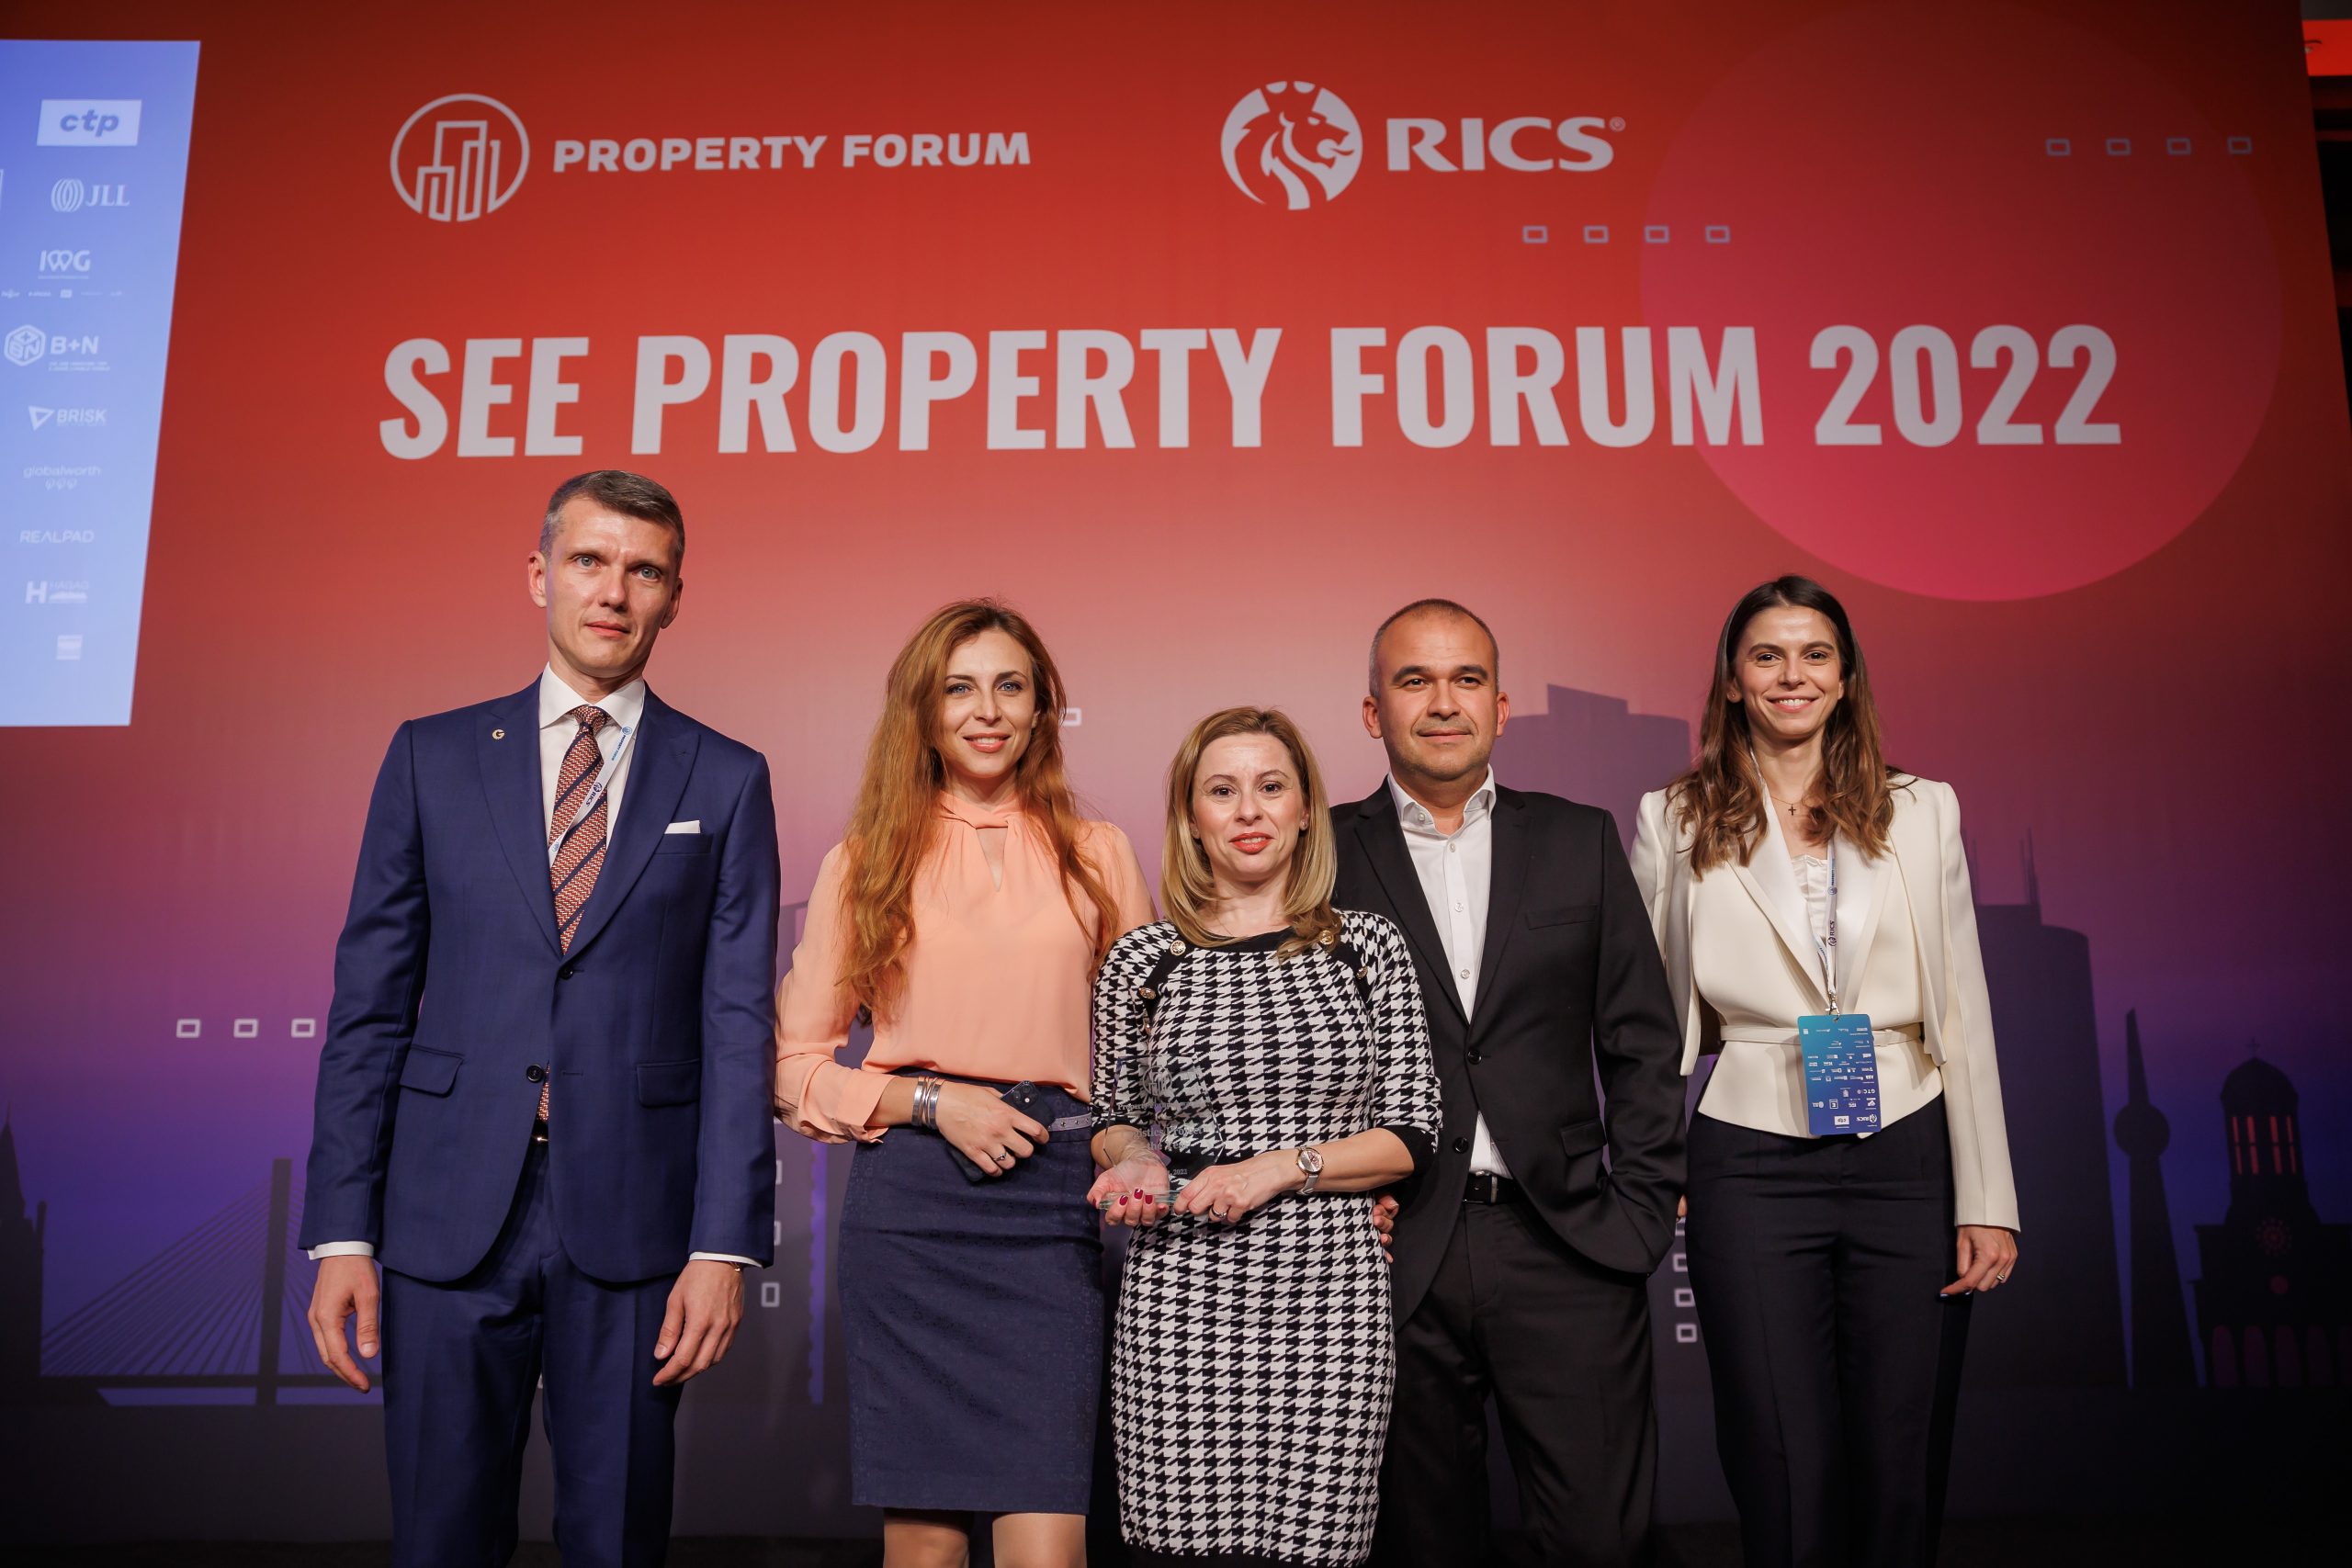 SEE PROPERTY FORUM 2022